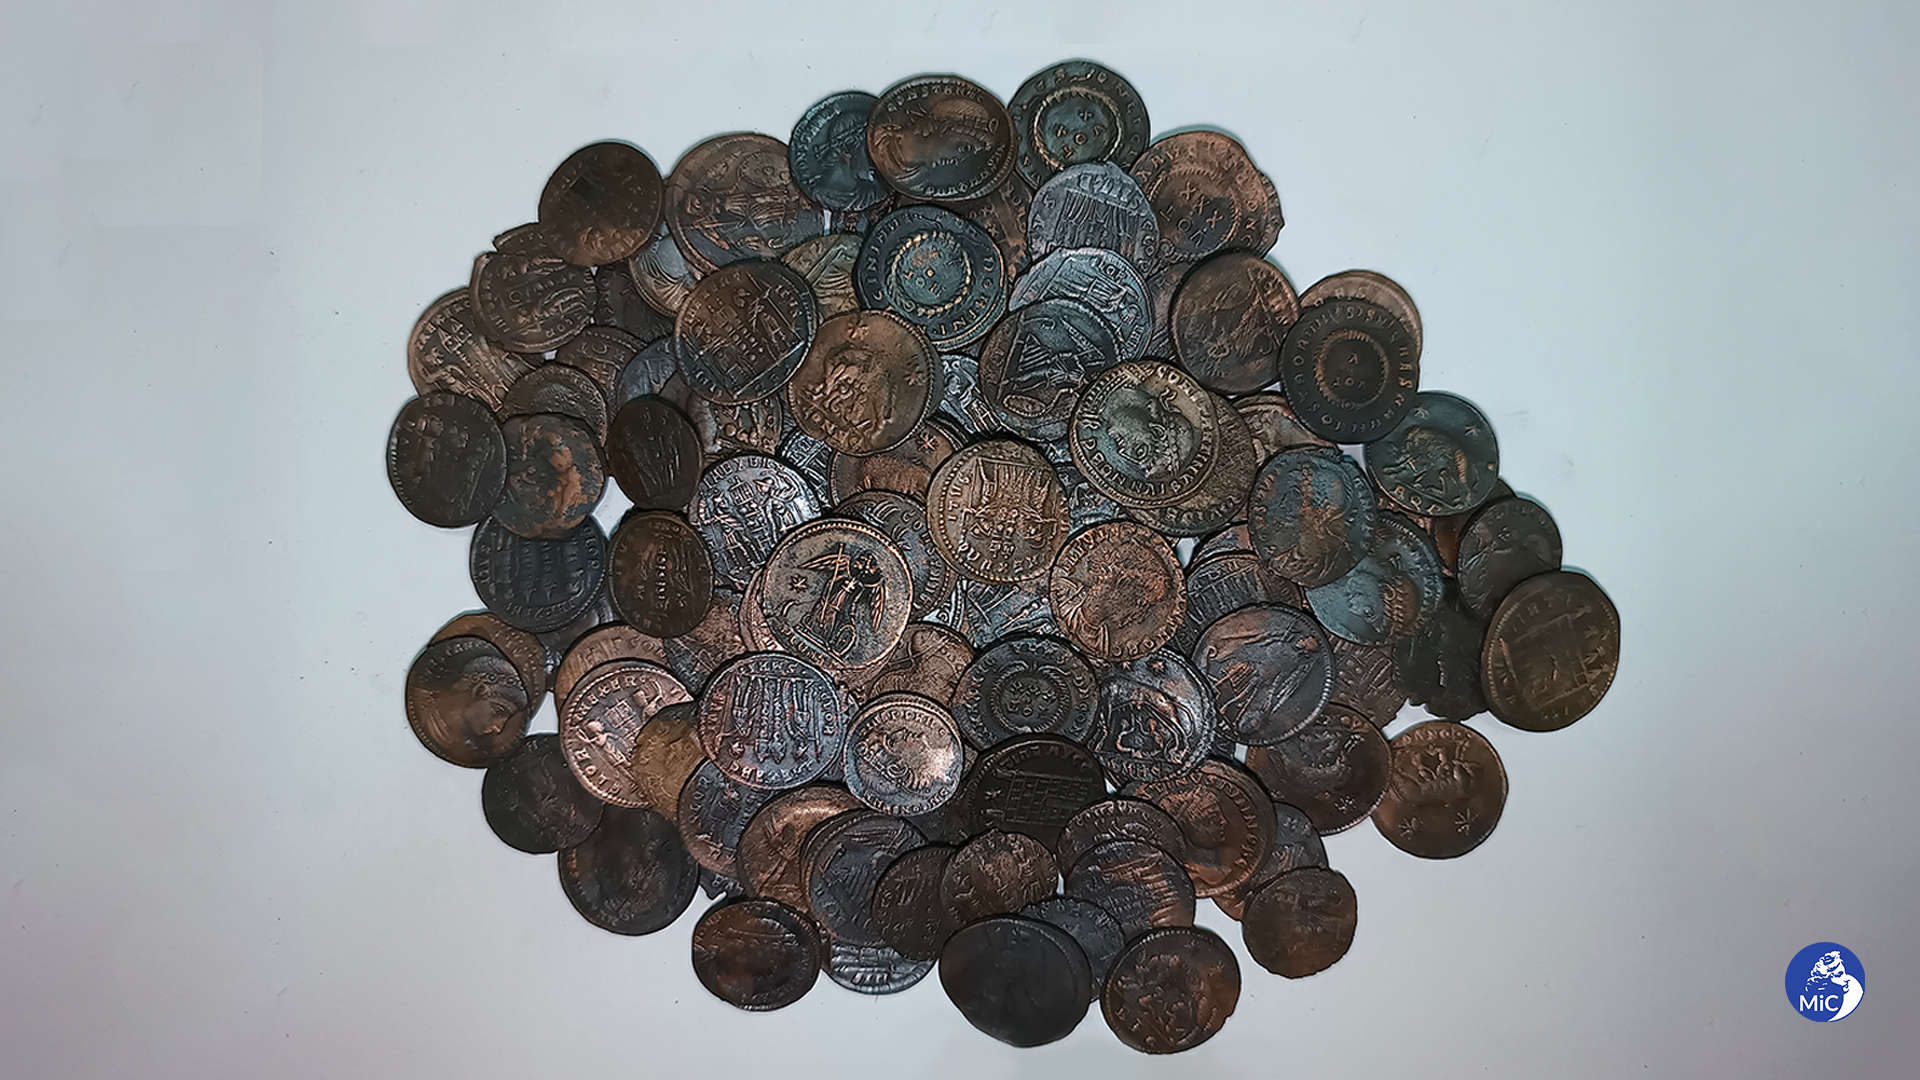 Extraordinary discovery well-preserved huge Roman of Sardinia: in treasure coins trove